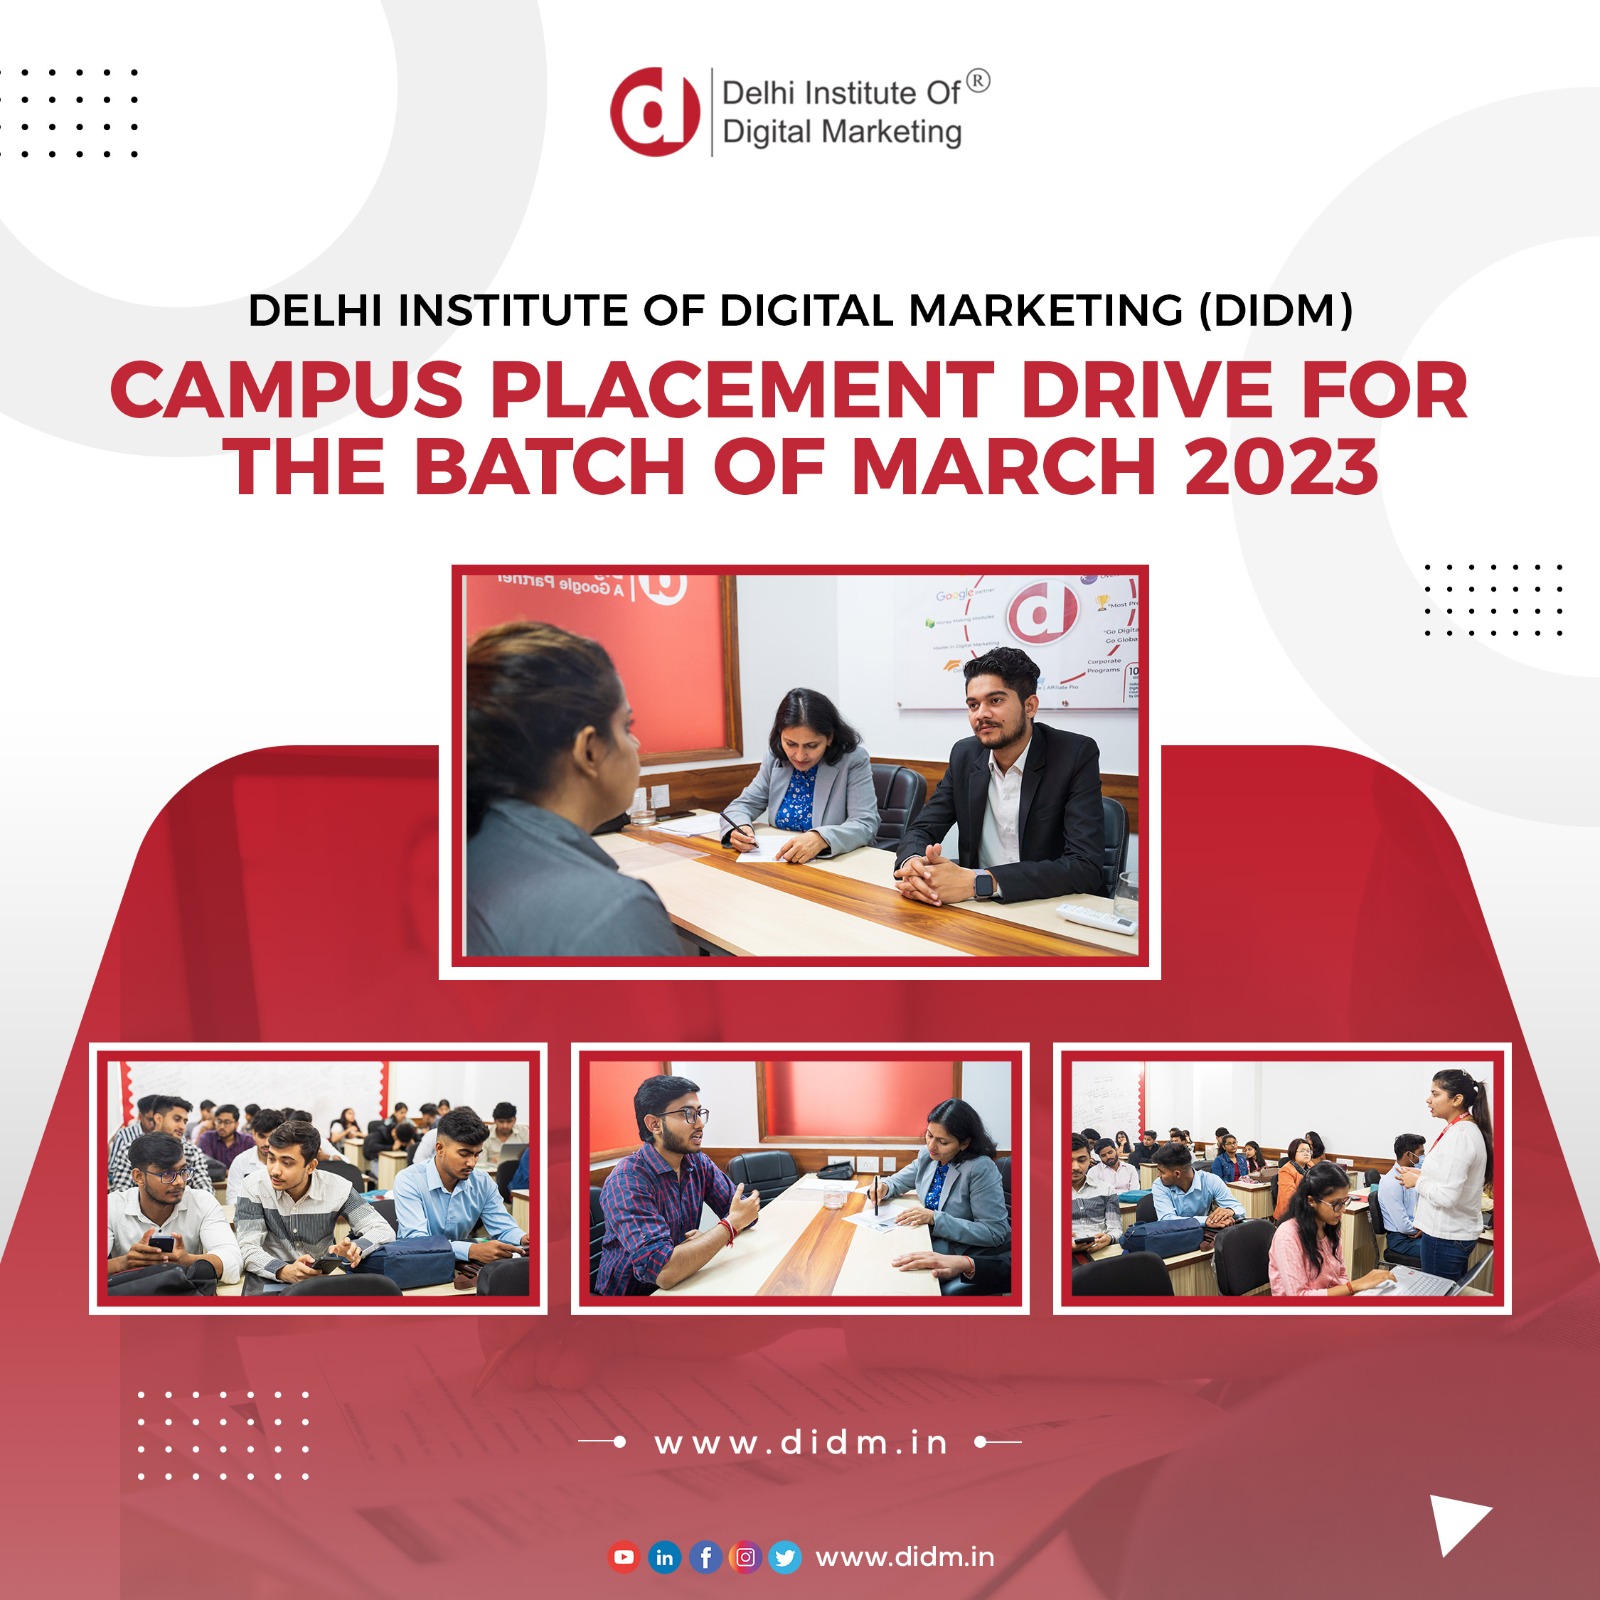 DIDM conducts an offline campus placement drive to assist trainees with job placement